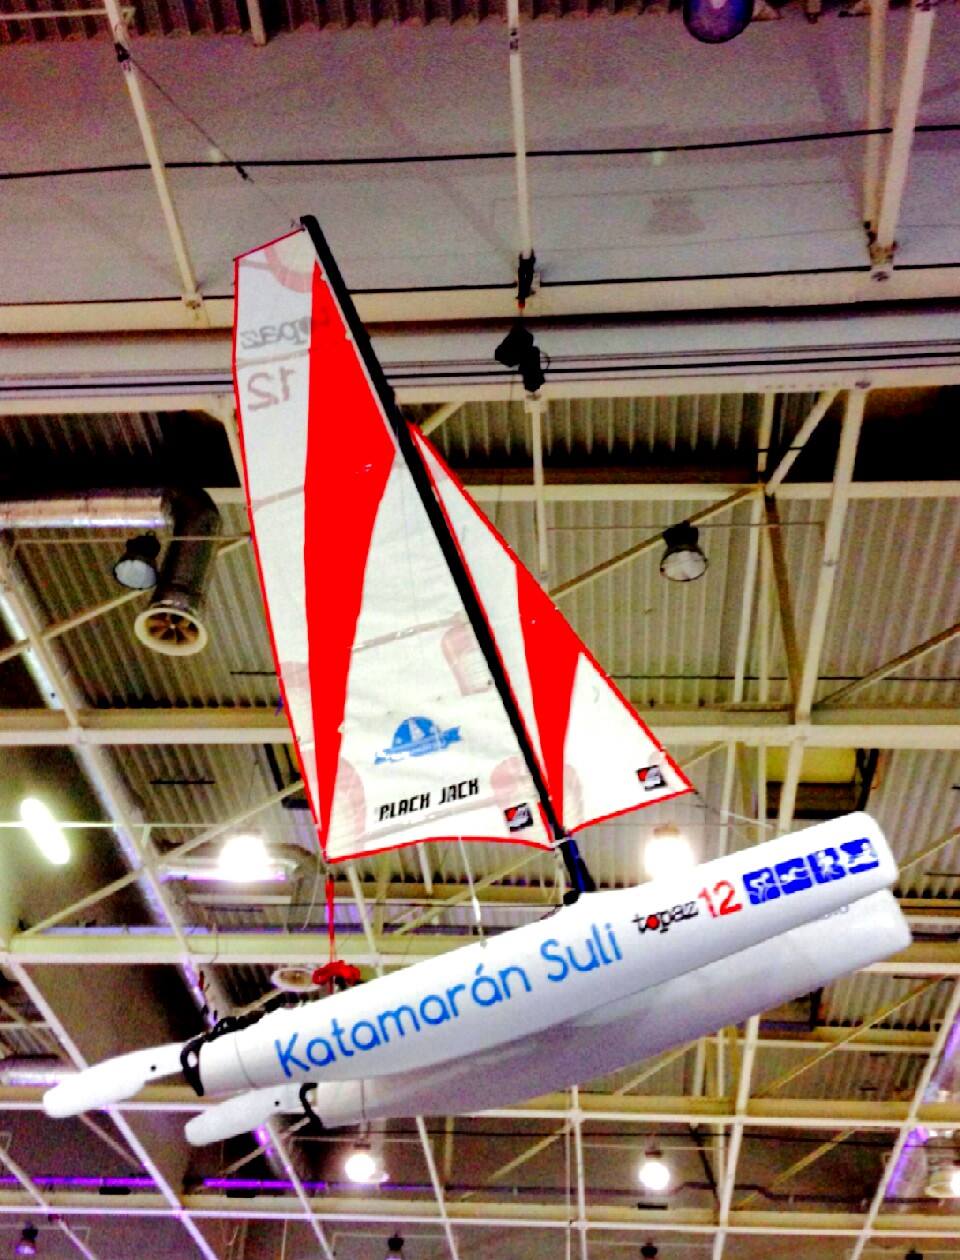 Budapest Boat Show 2015